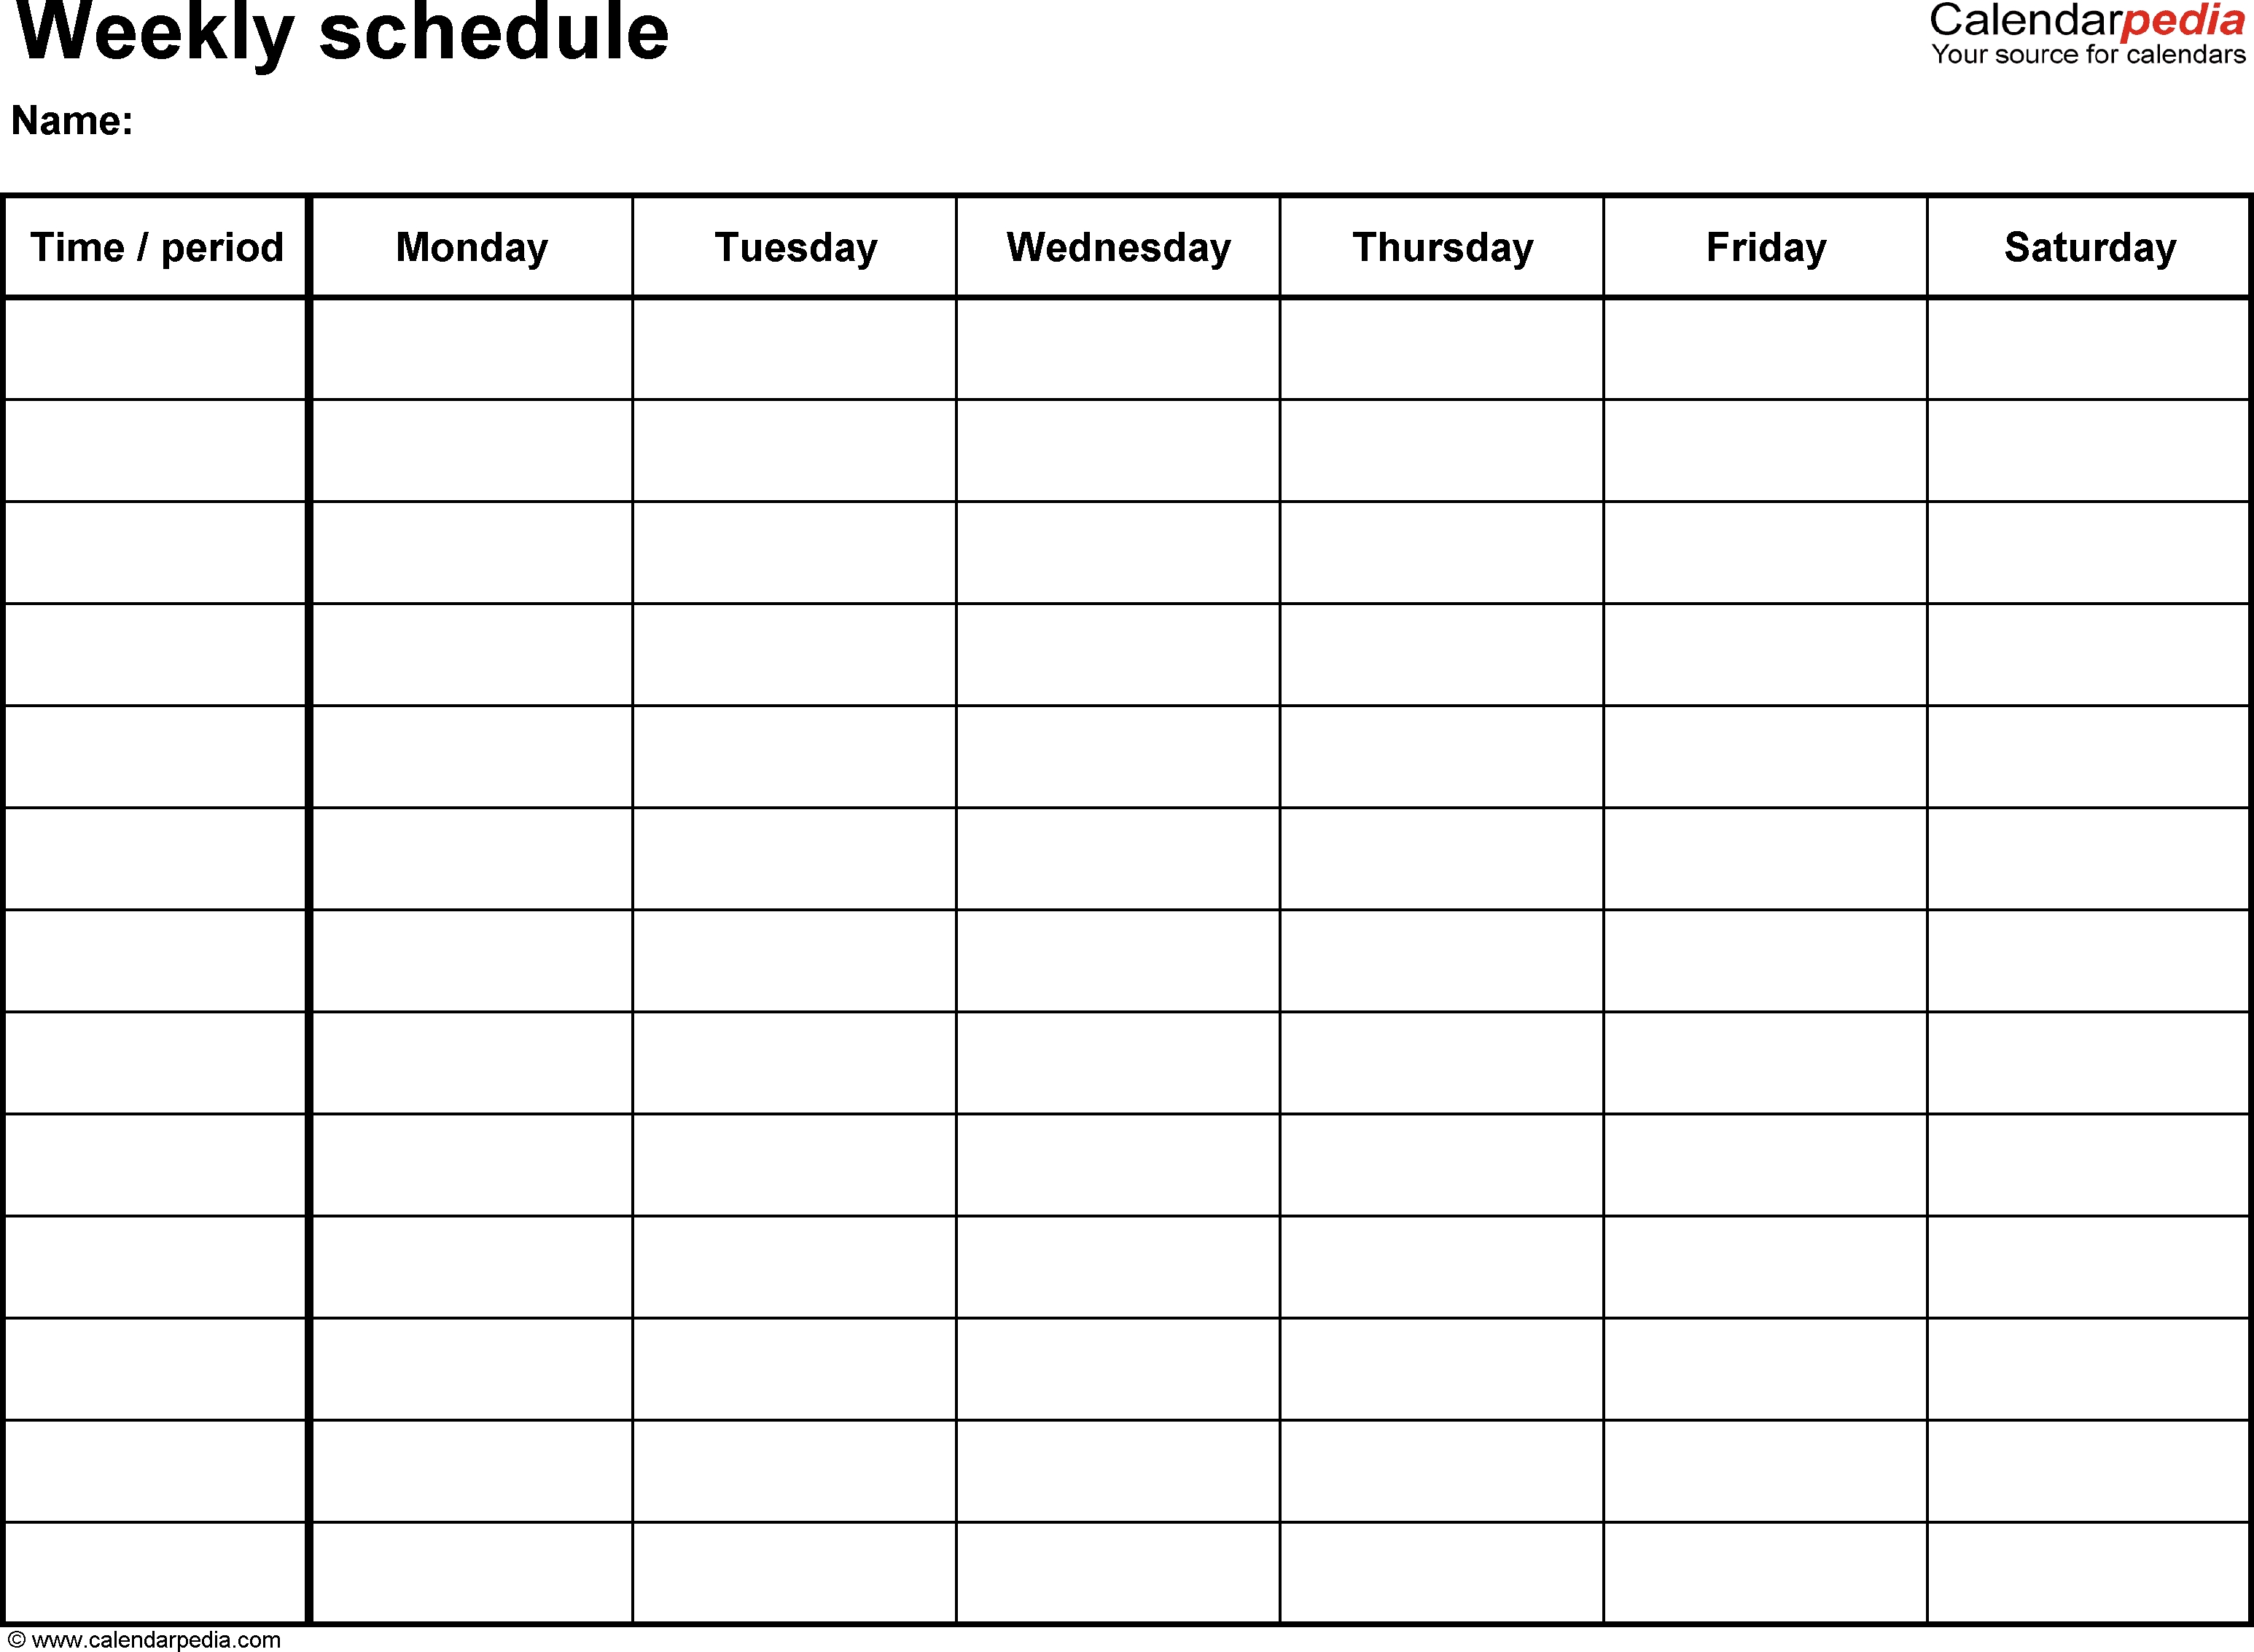 Free Weekly Schedule Templates For Pdf - 18 Templates throughout Monday To Friday Schedule Printable